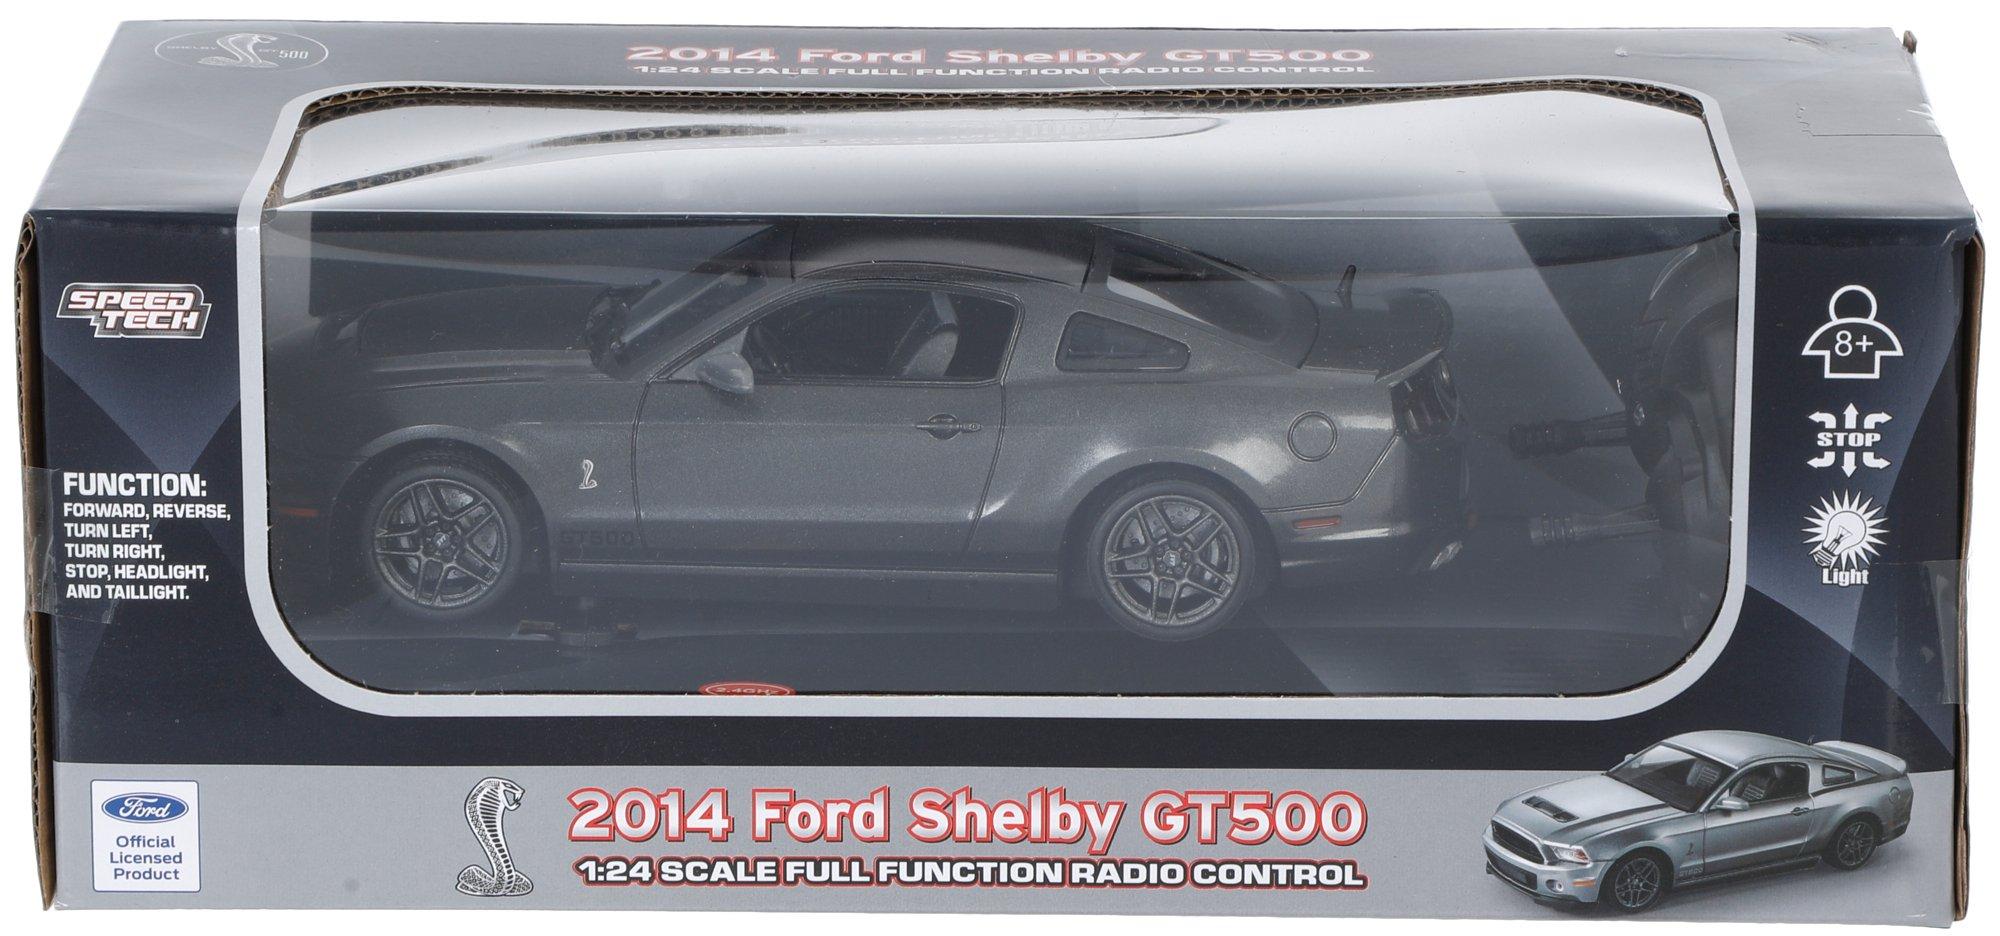 Kids 2014 Ford Shelby GT500 R/C Toy